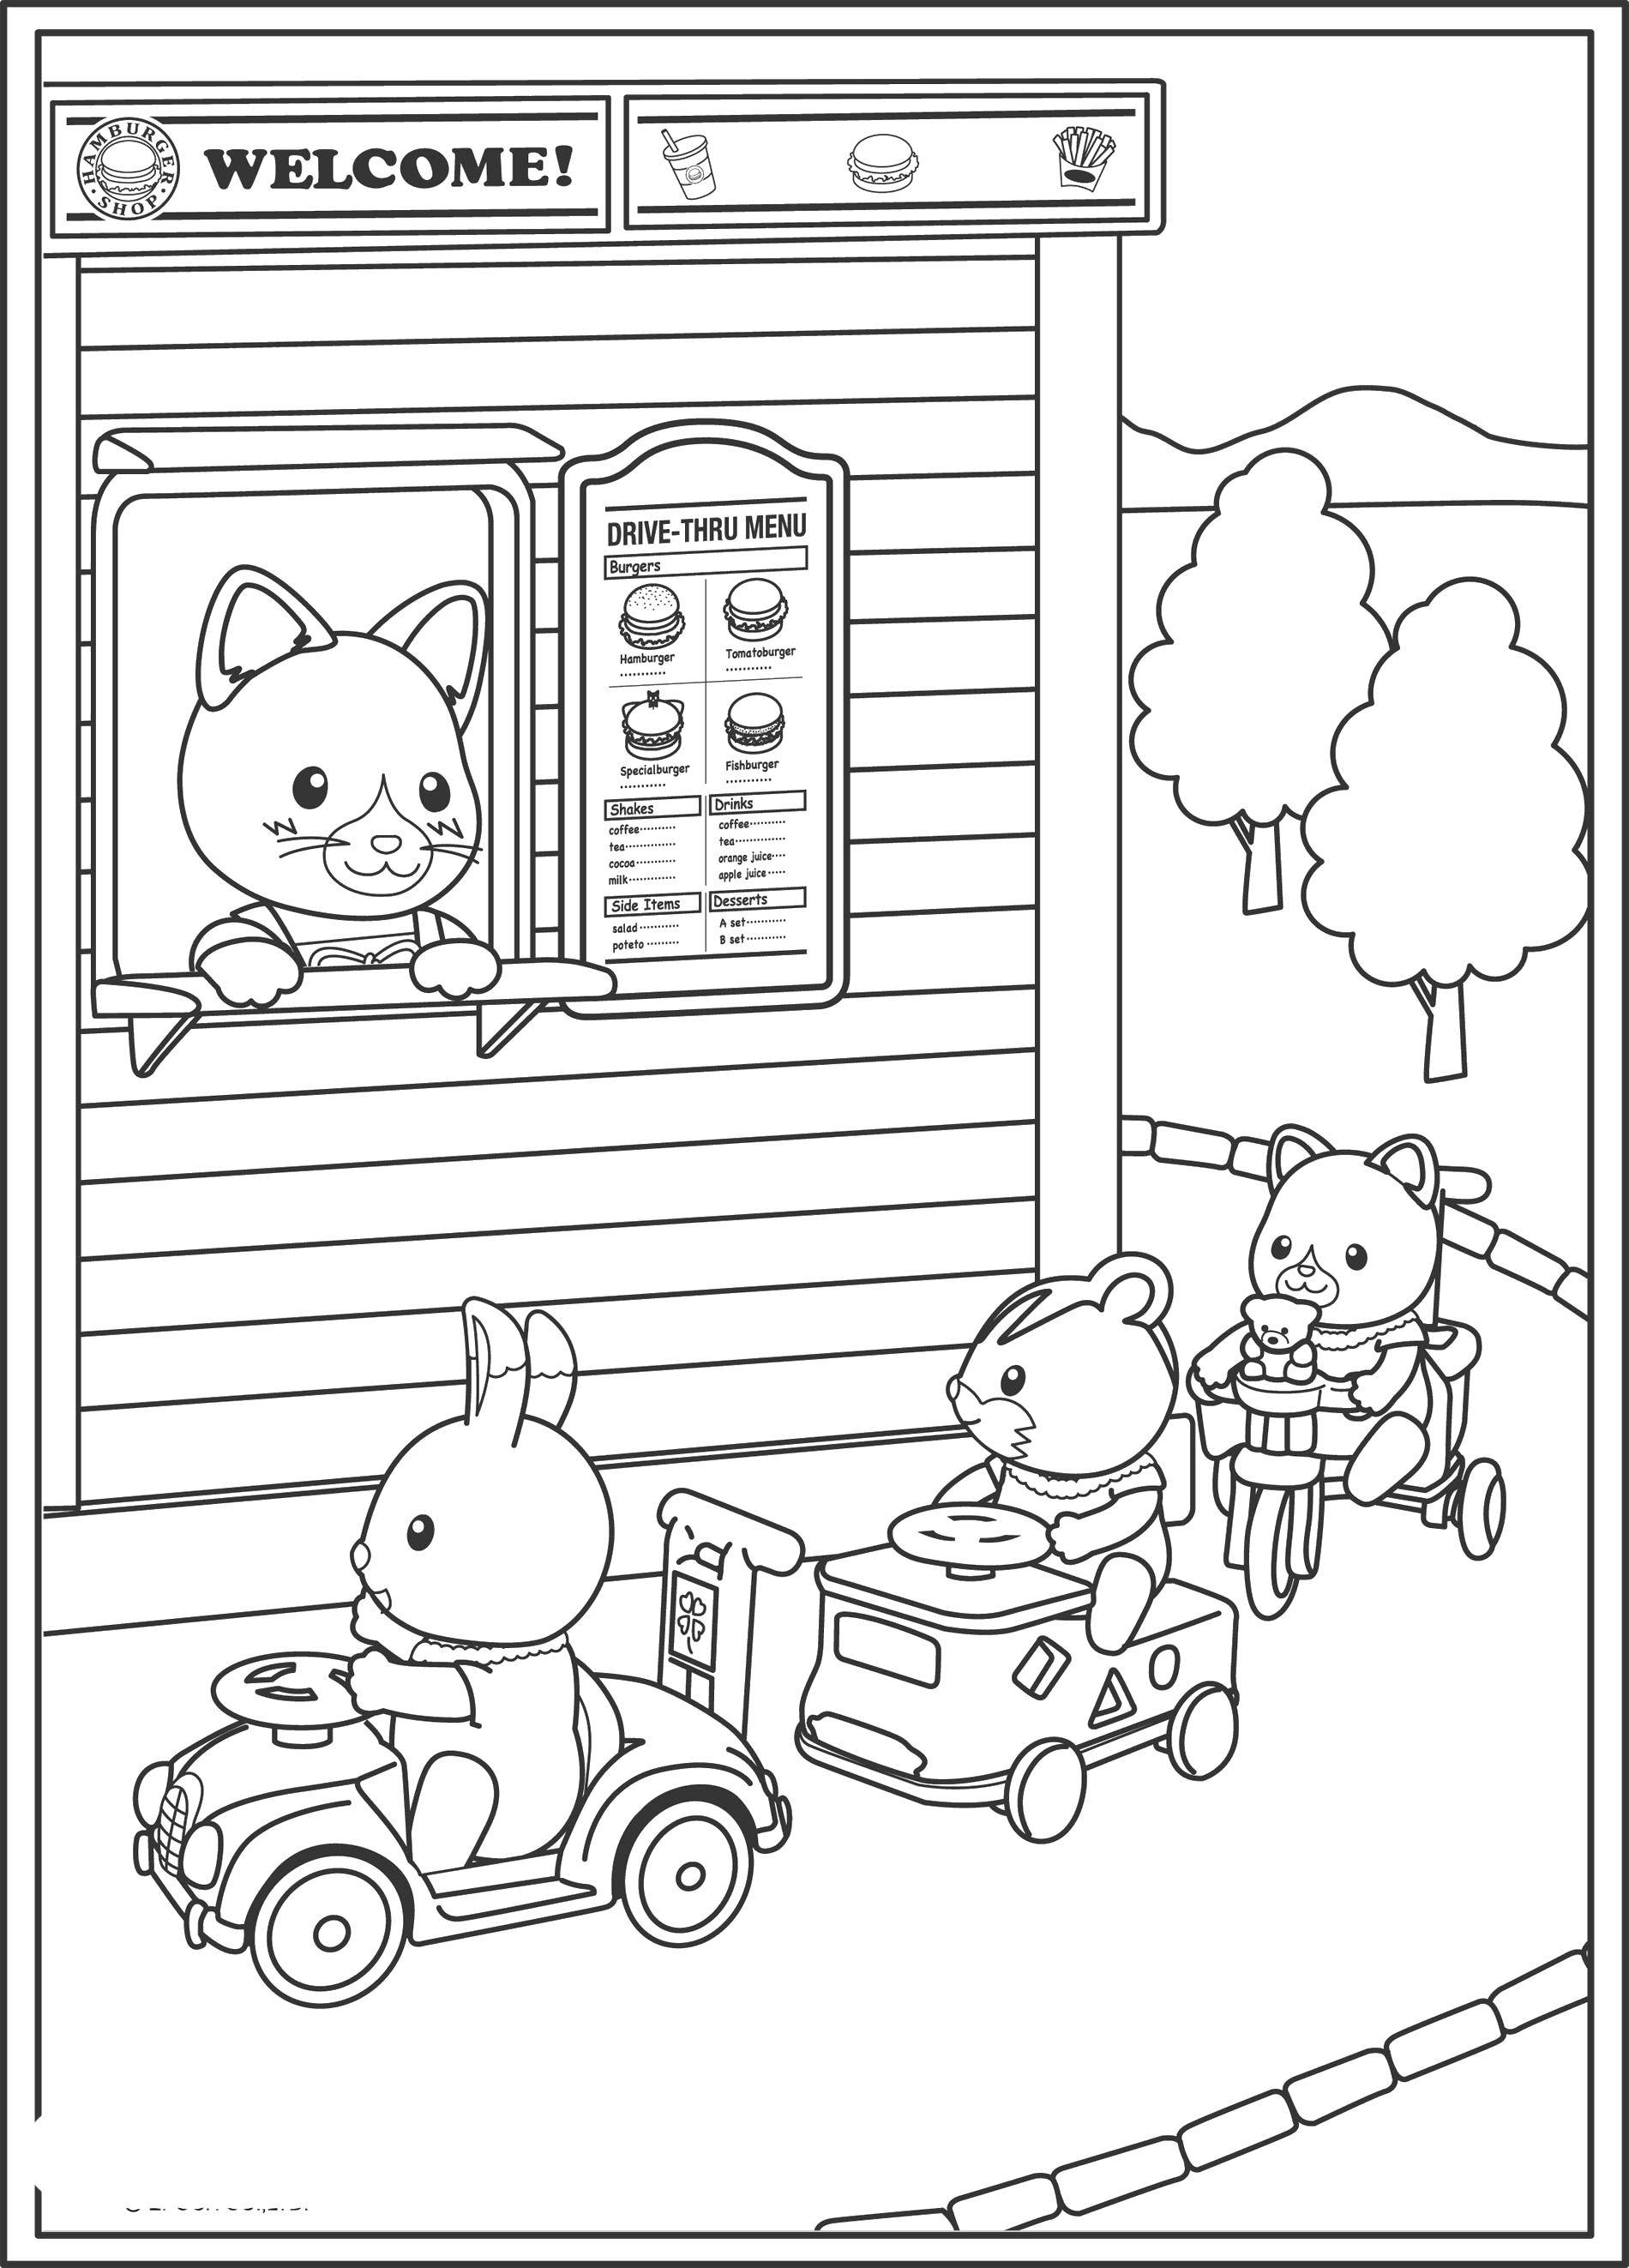 Coloring The animals went to the store. Category family animals. Tags:  Animals, Bunny, squirrel, kitty.